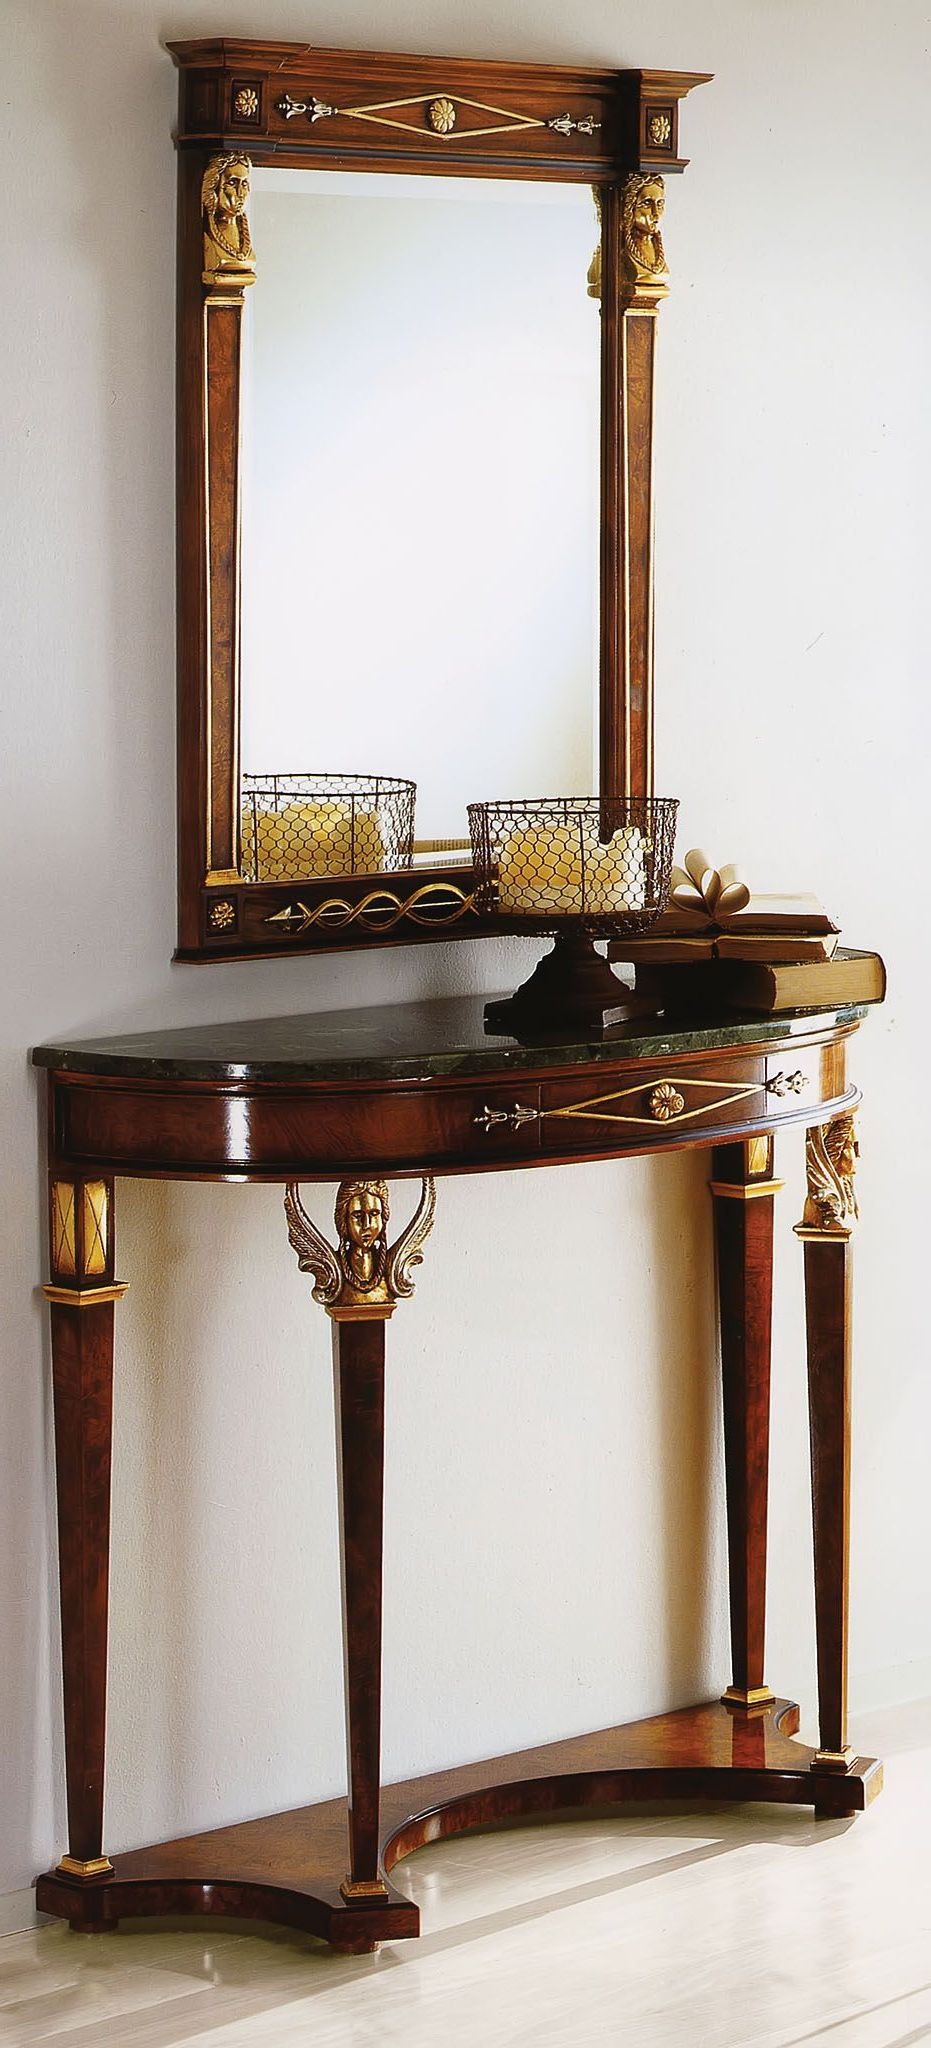 42" W X 16" D X 35" H Hand Carved Console In Walnut Finish In Recent Gold And Mirror Modern Cube Console Tables (View 2 of 10)